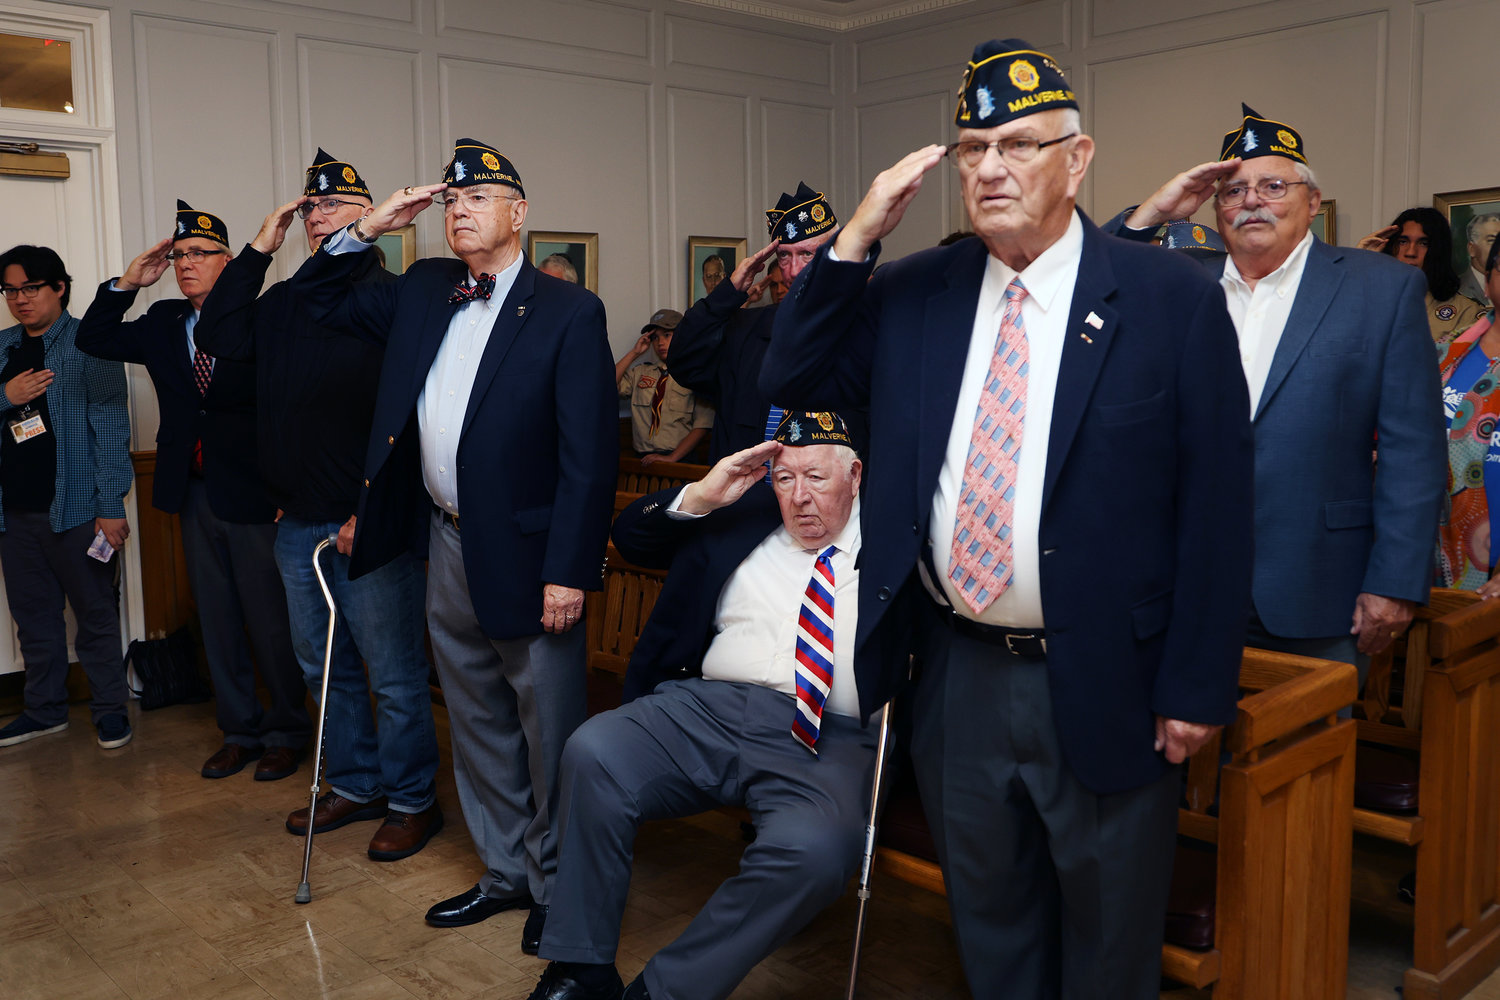 Veterans who attended Malverne’s annual Veterans Day ceremony saluted during the singing of the national anthem by vocalist Kaylee Palmer.